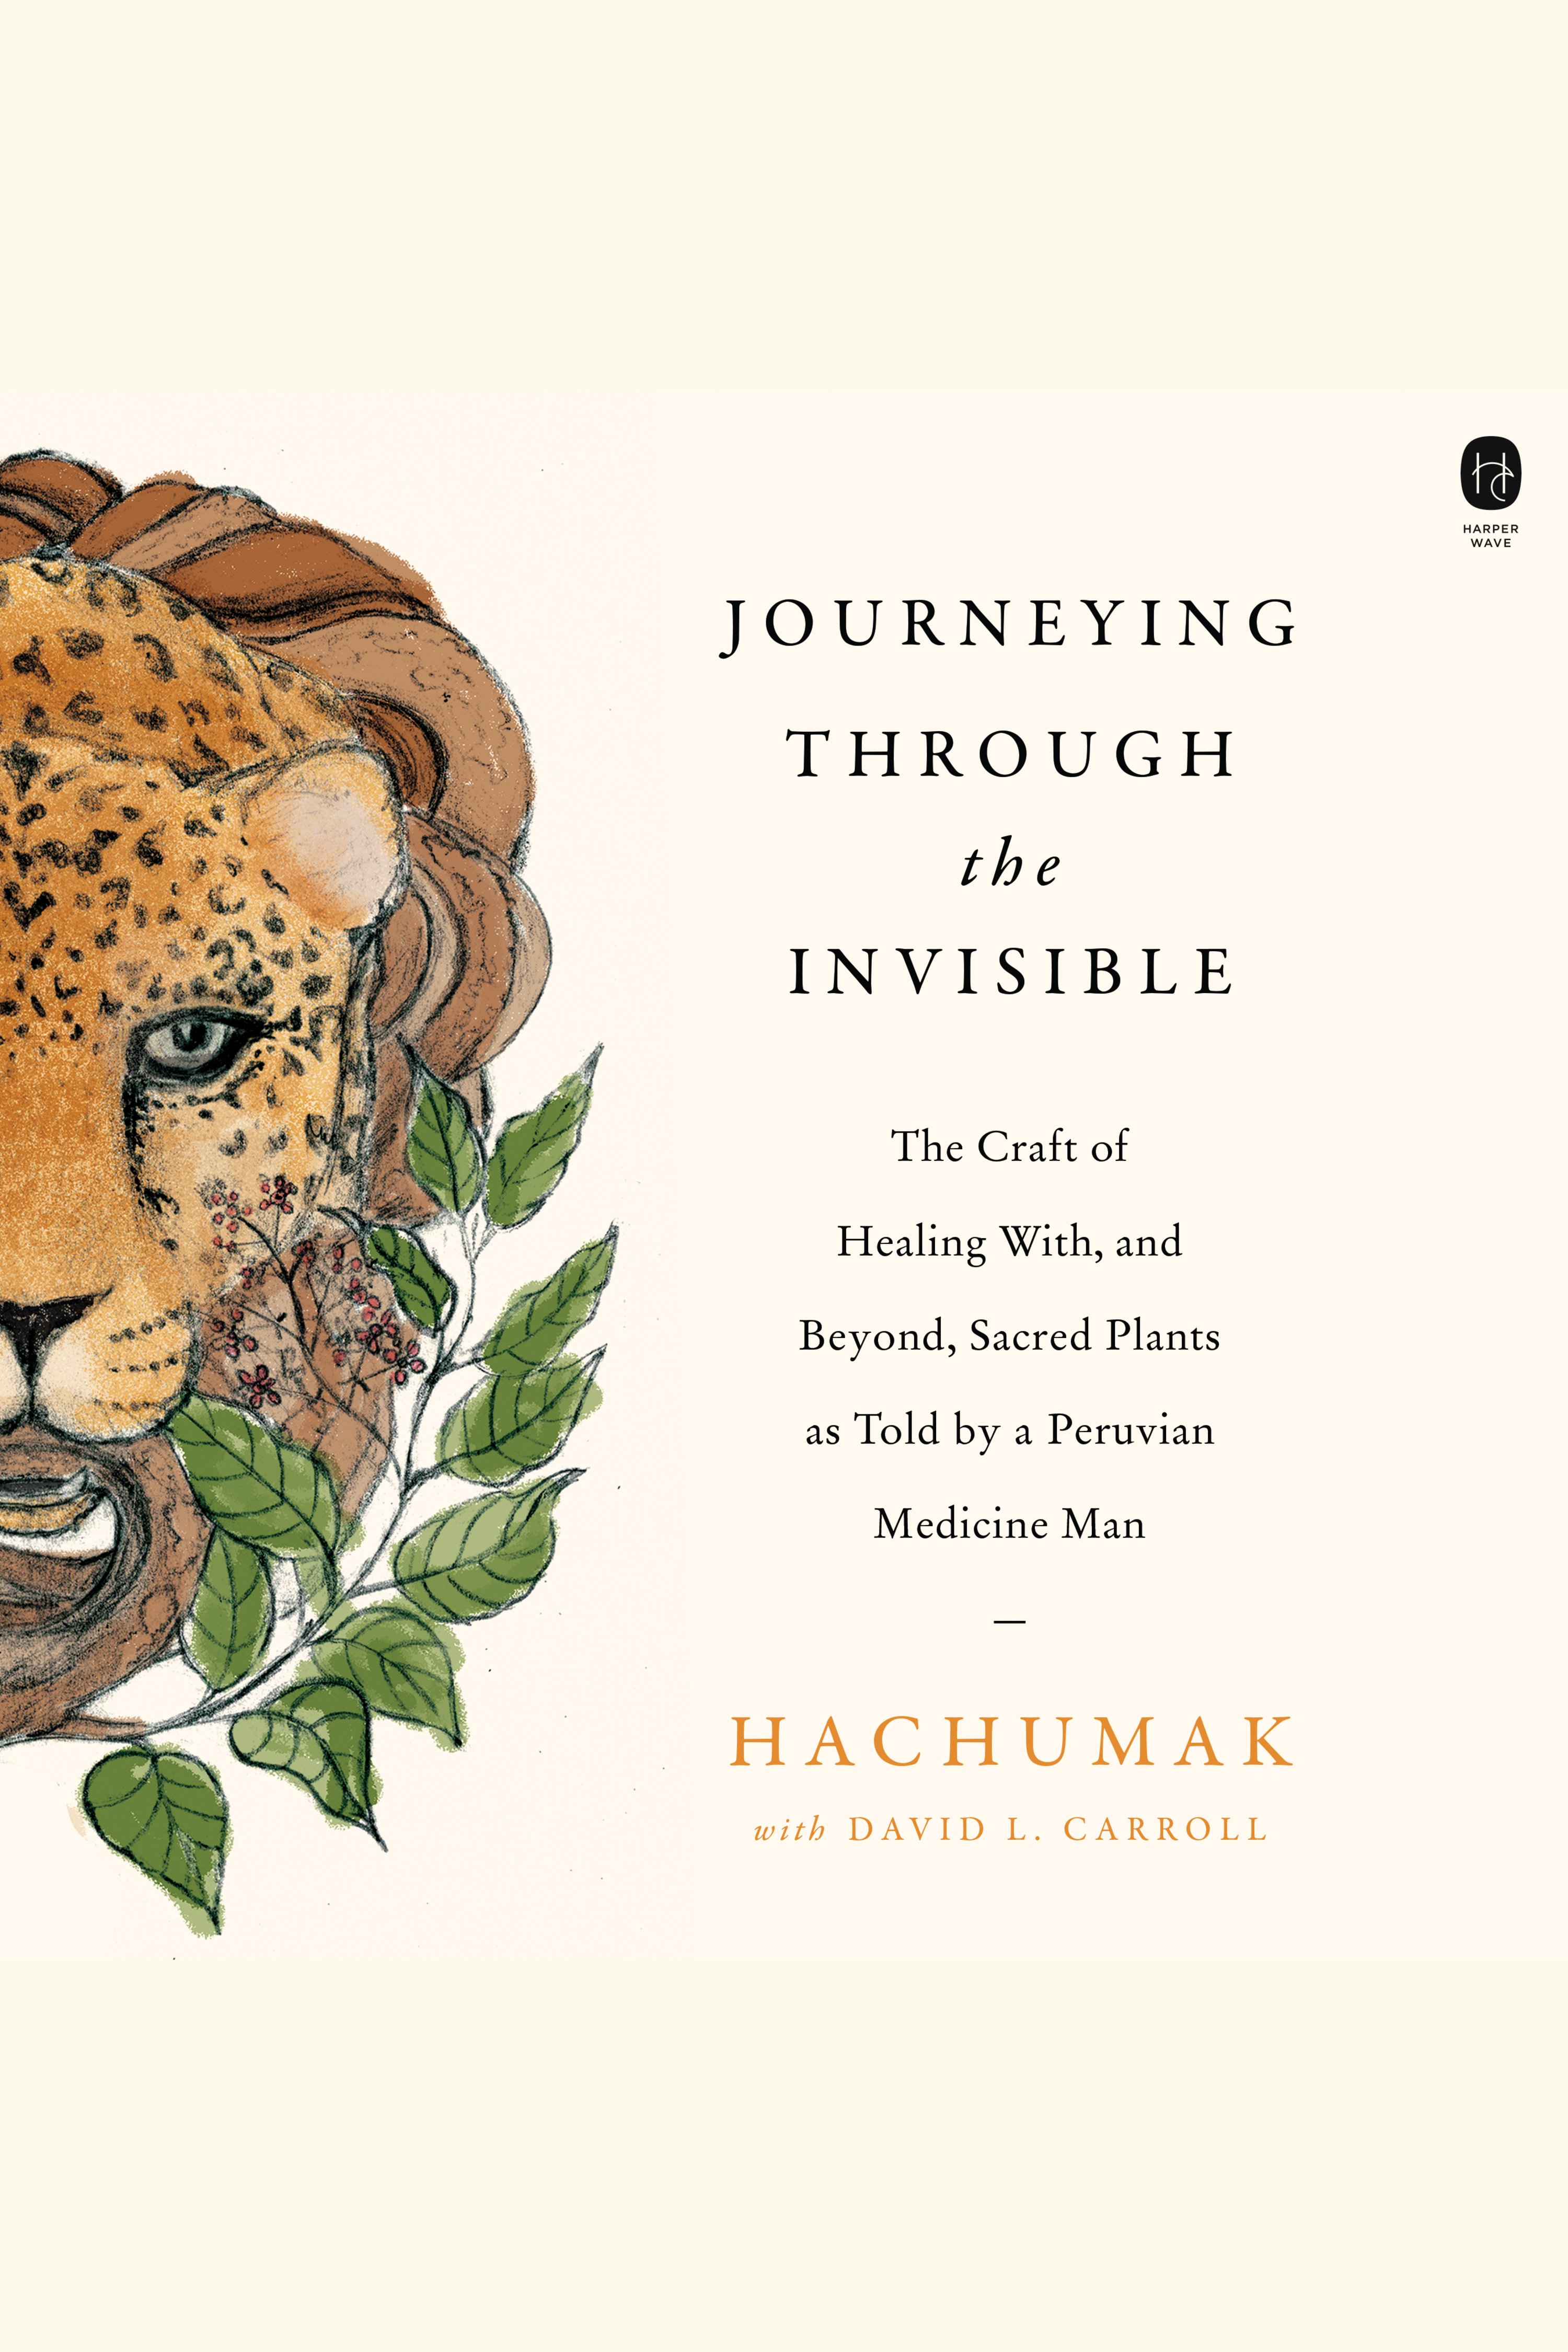 Journeying Through the Invisible The Craft of Healing with, and Beyond, Sacred Plants, as Told by a Peruvian Medicine Man cover image